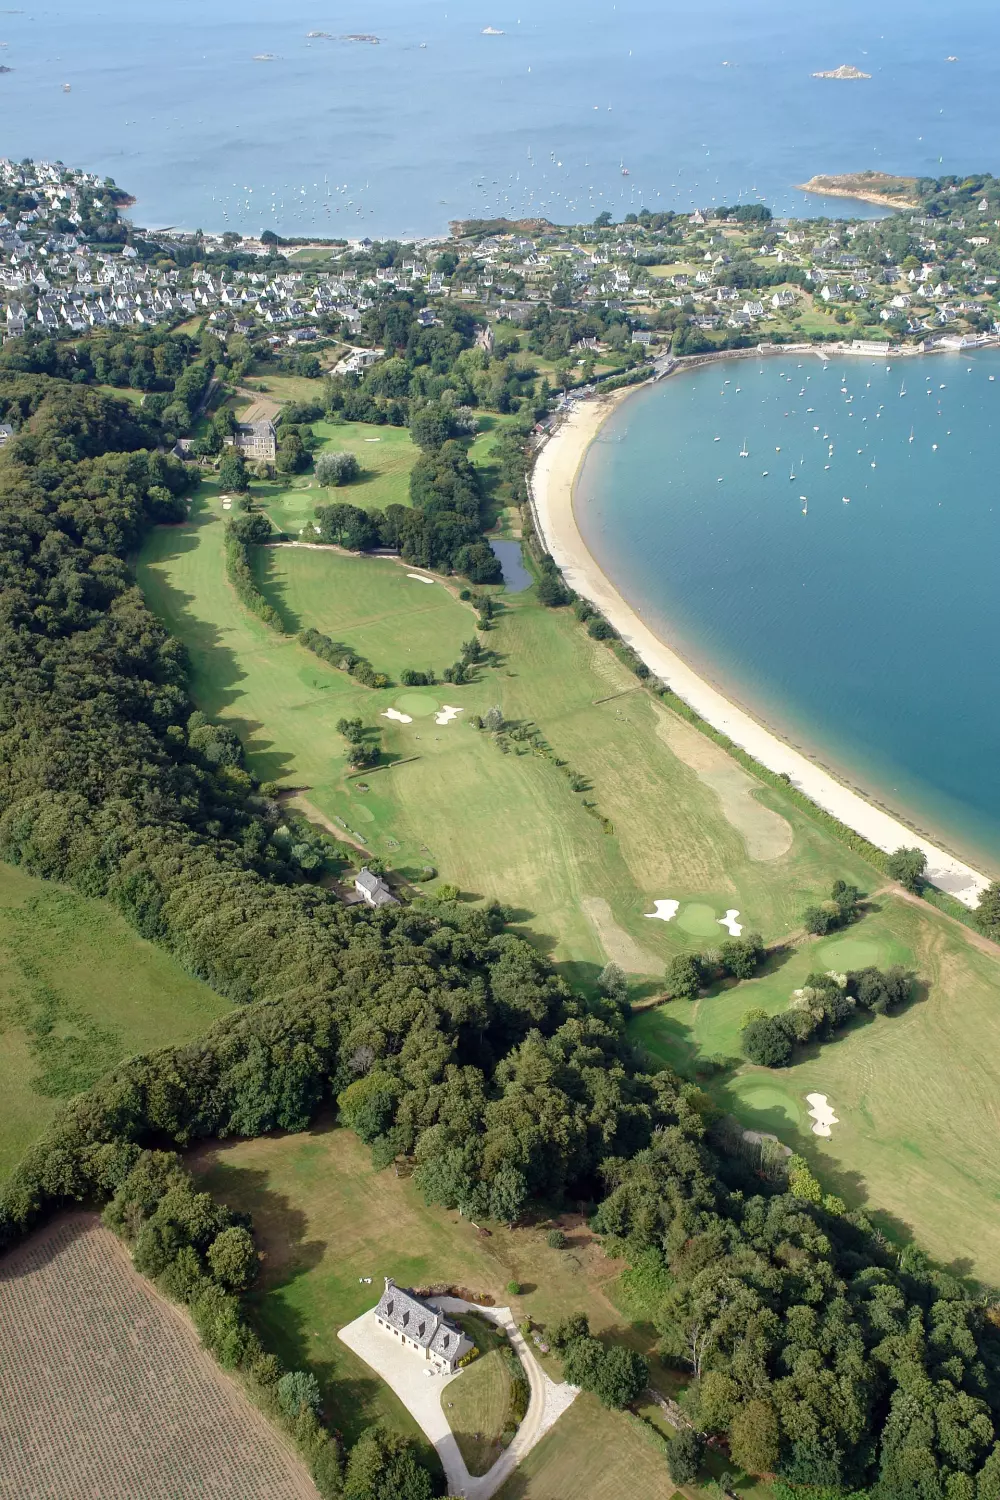 The forest, the golf course, the sea